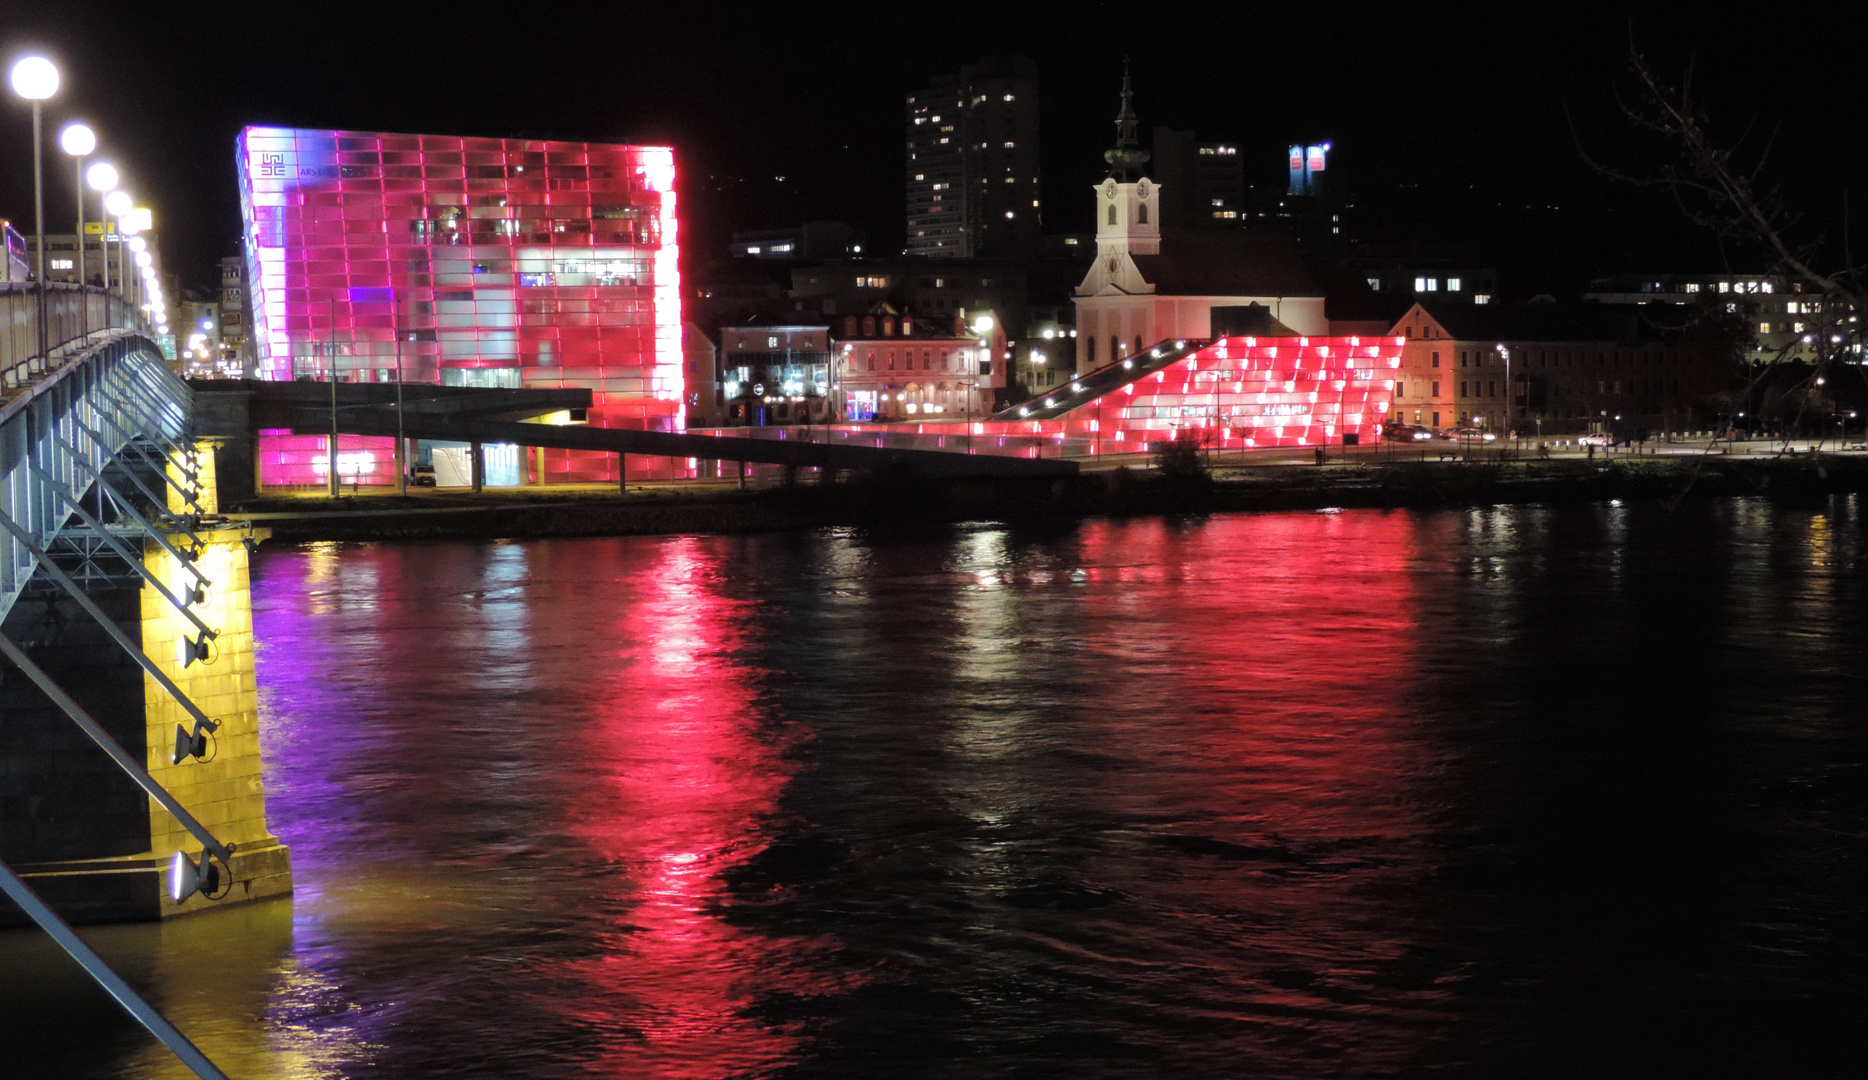 Ars electronica